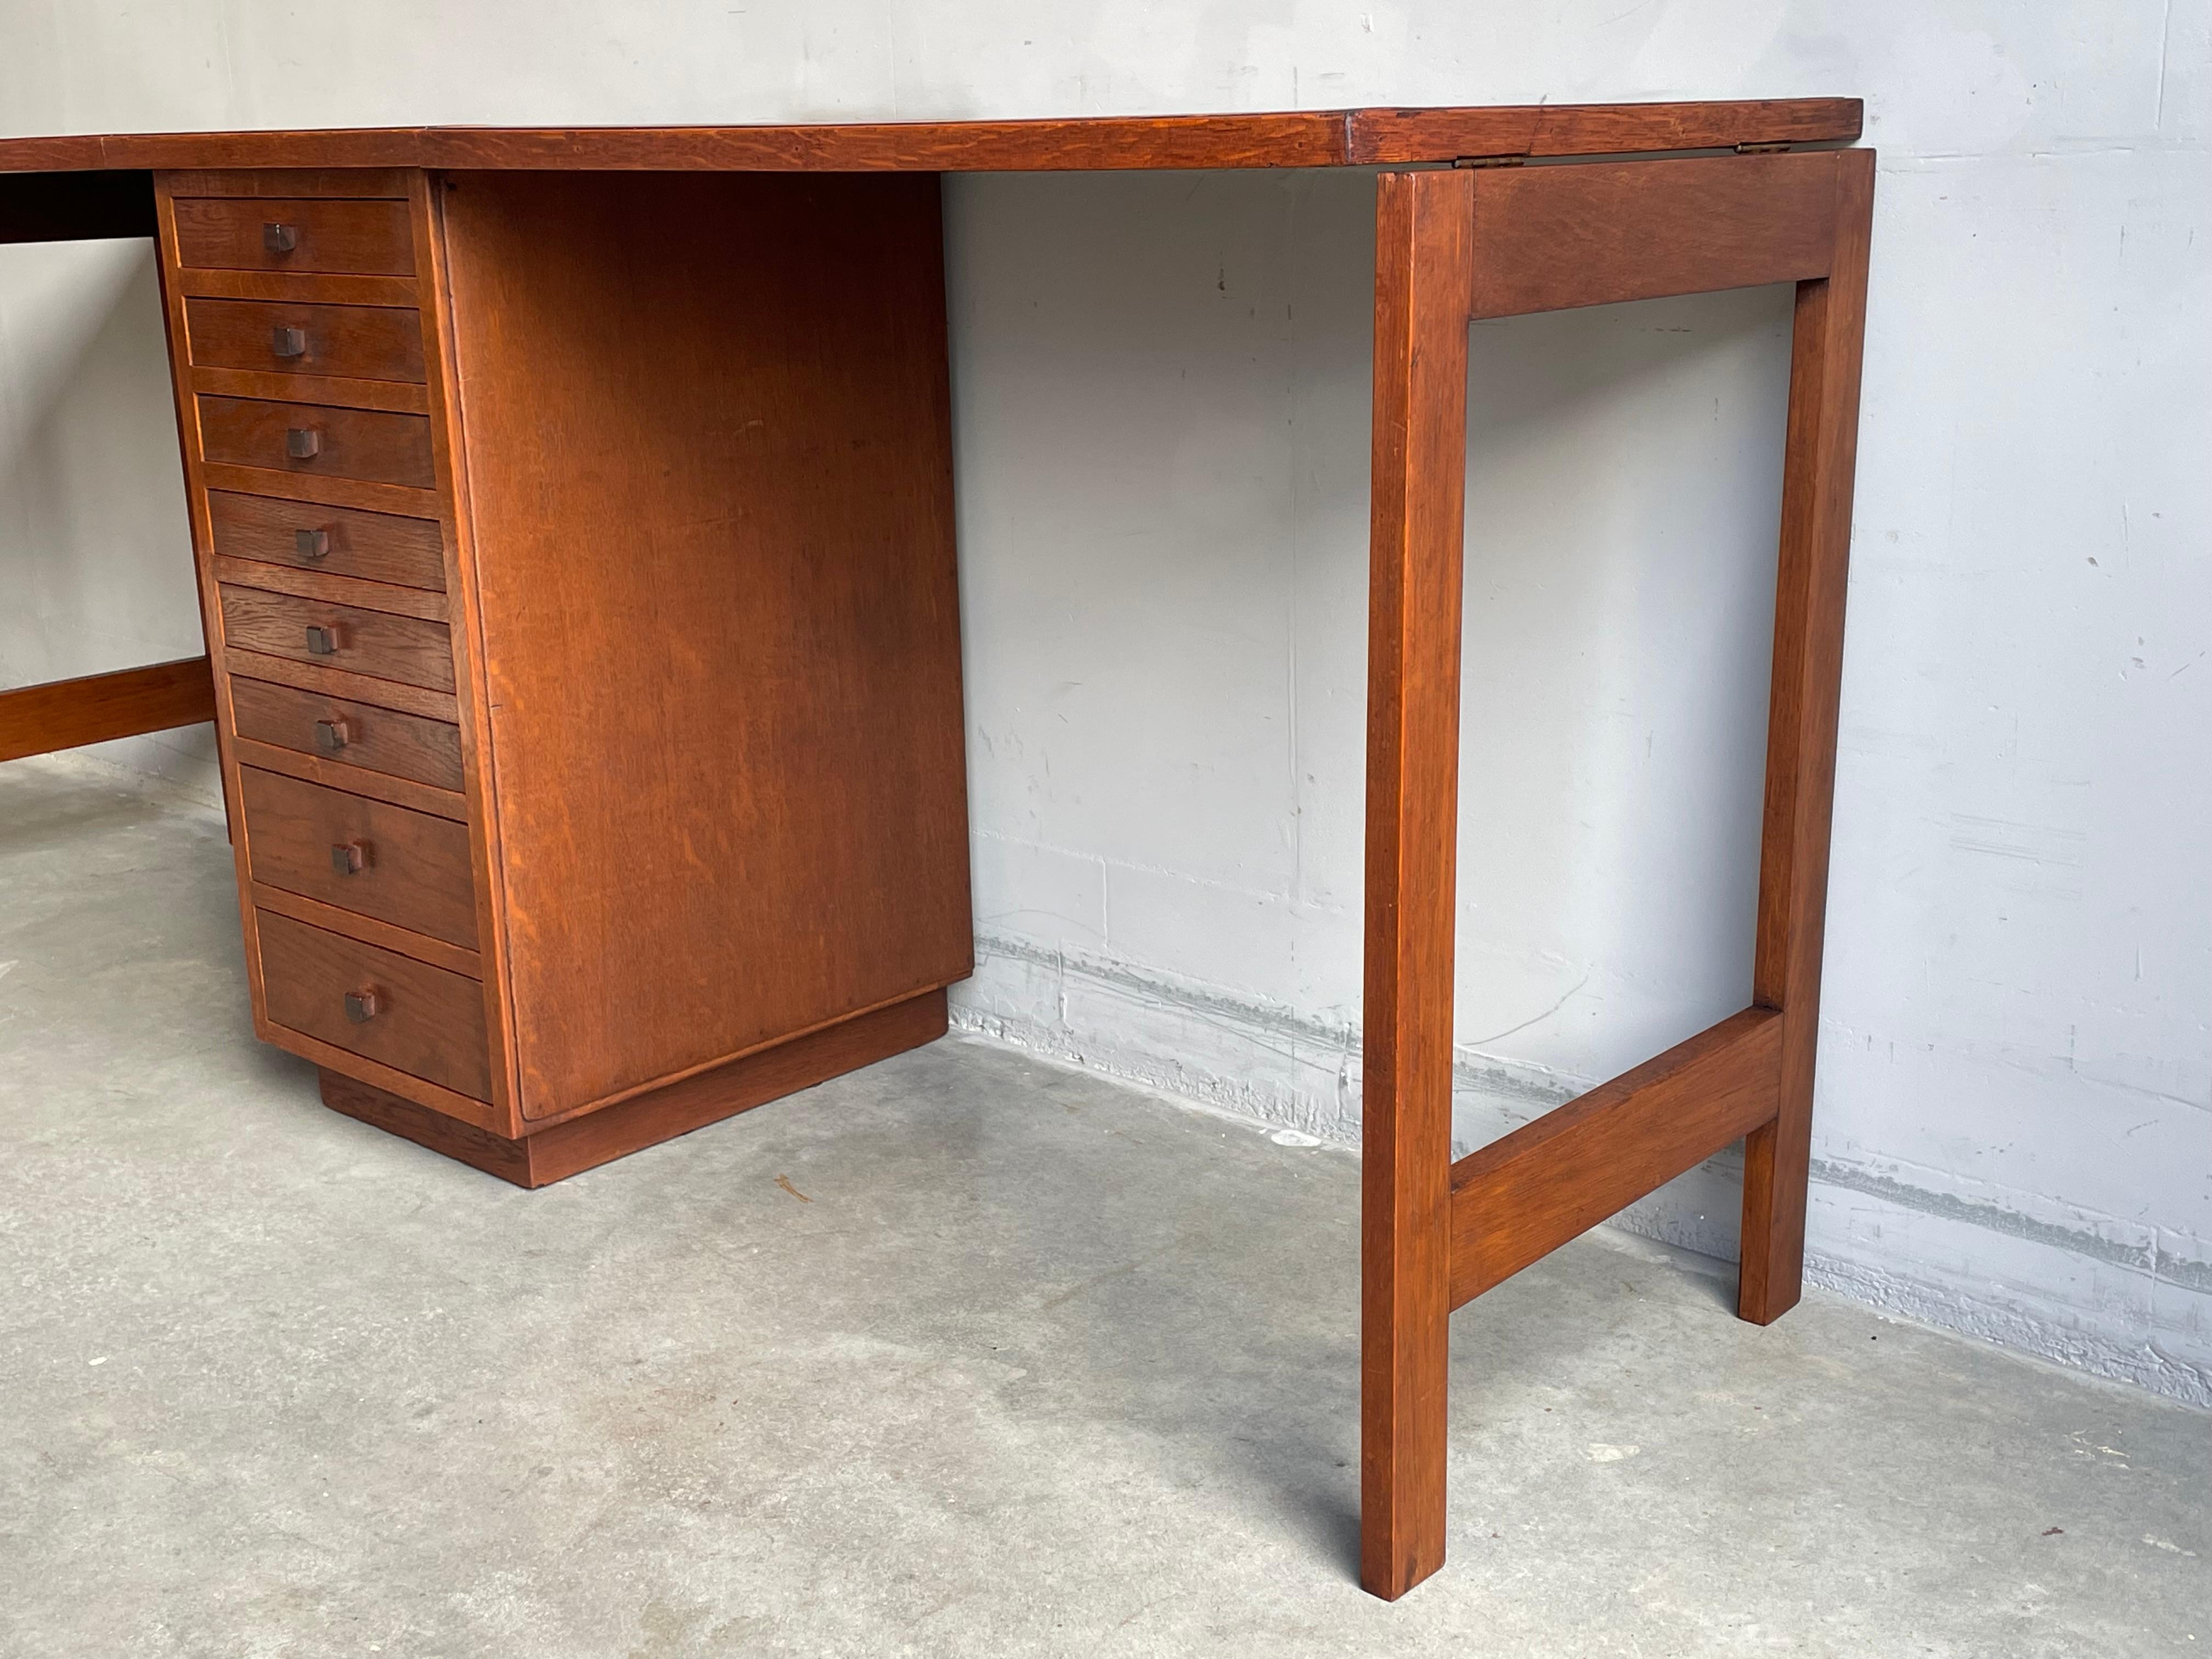 Patinated Unique Dutch Arts & Crafts Oak Partners Desk and Filing Cabinet Into One, 1910s